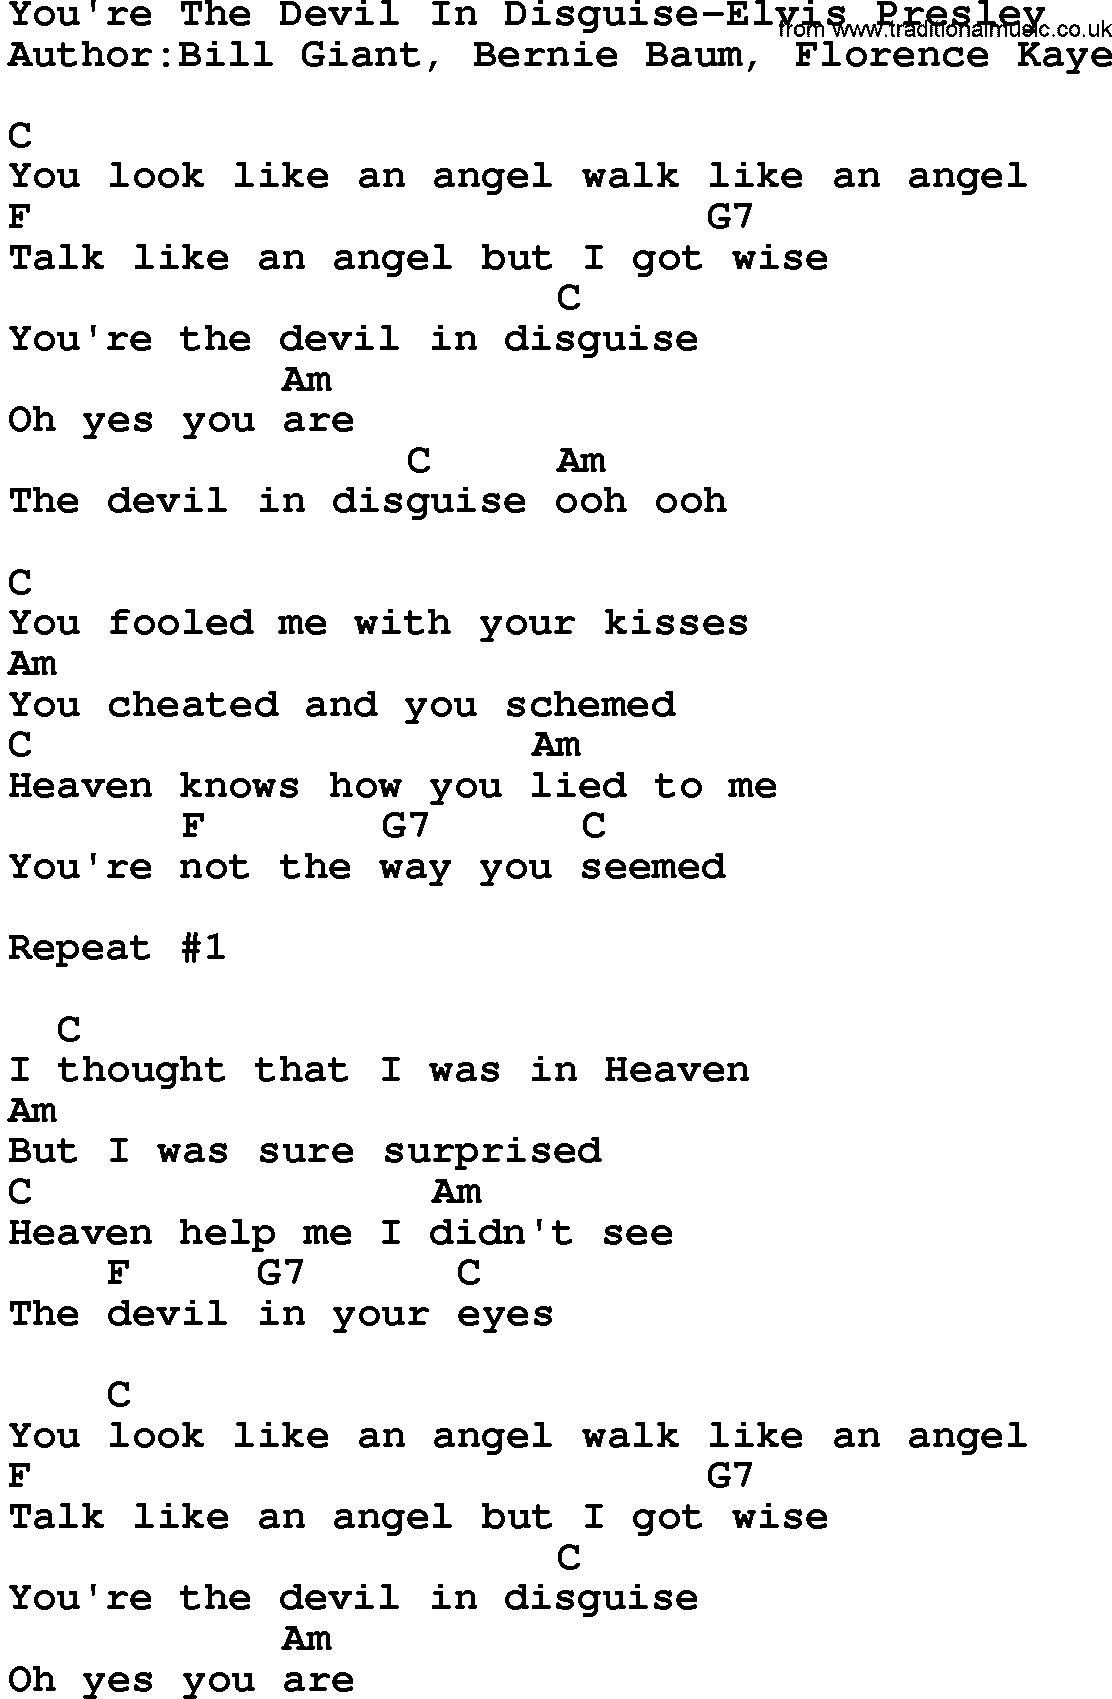 Country music song: You're The Devil In Disguise-Elvis Presley lyrics and chords